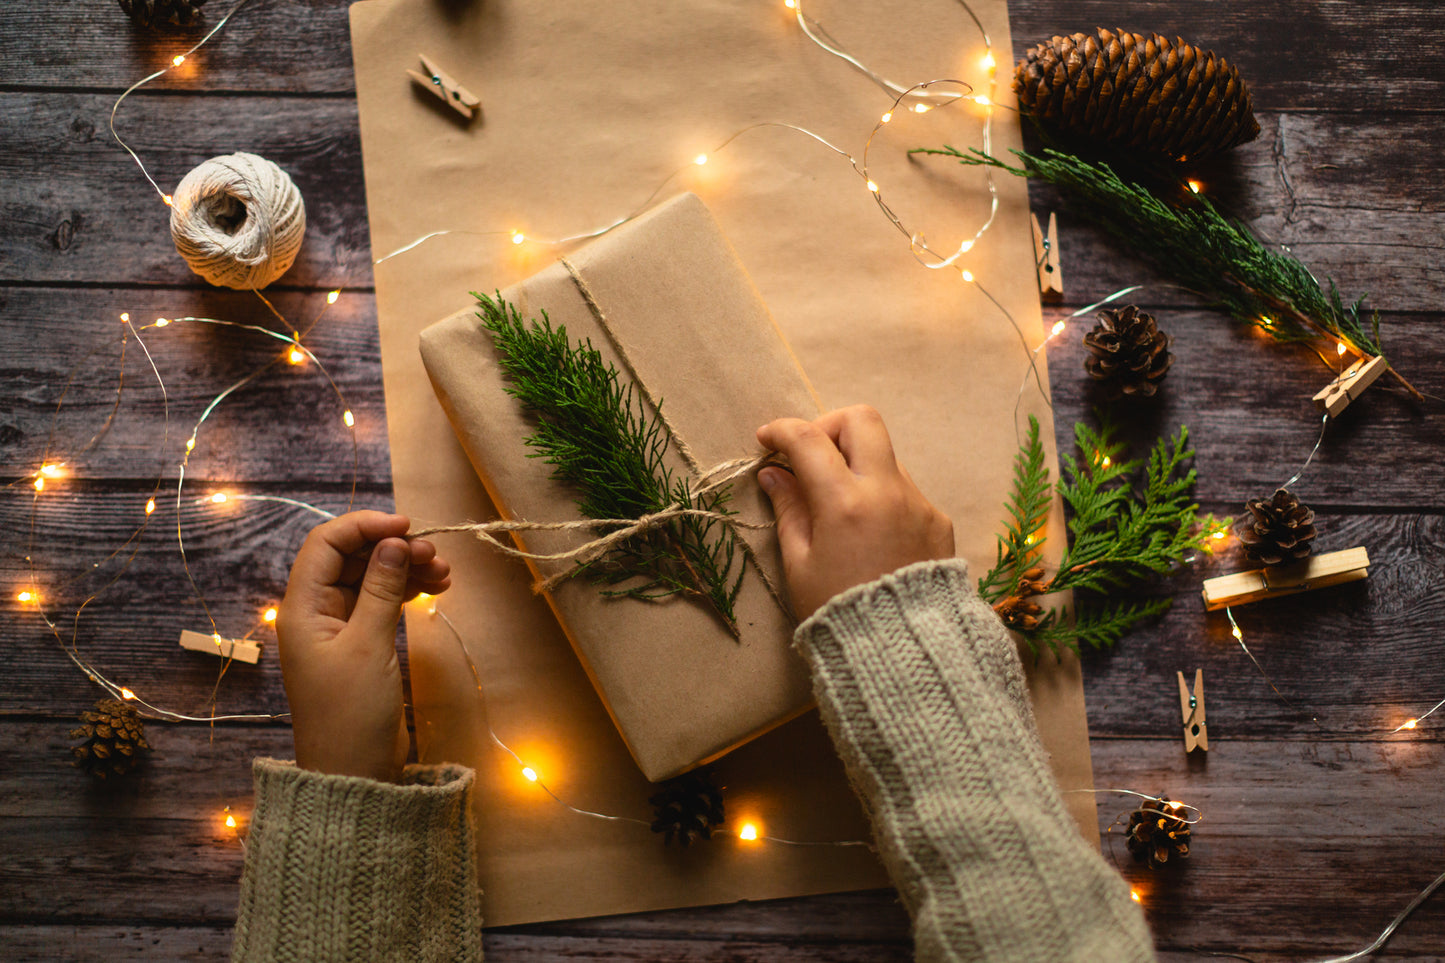 How to have a sustainable Christmas with less waste